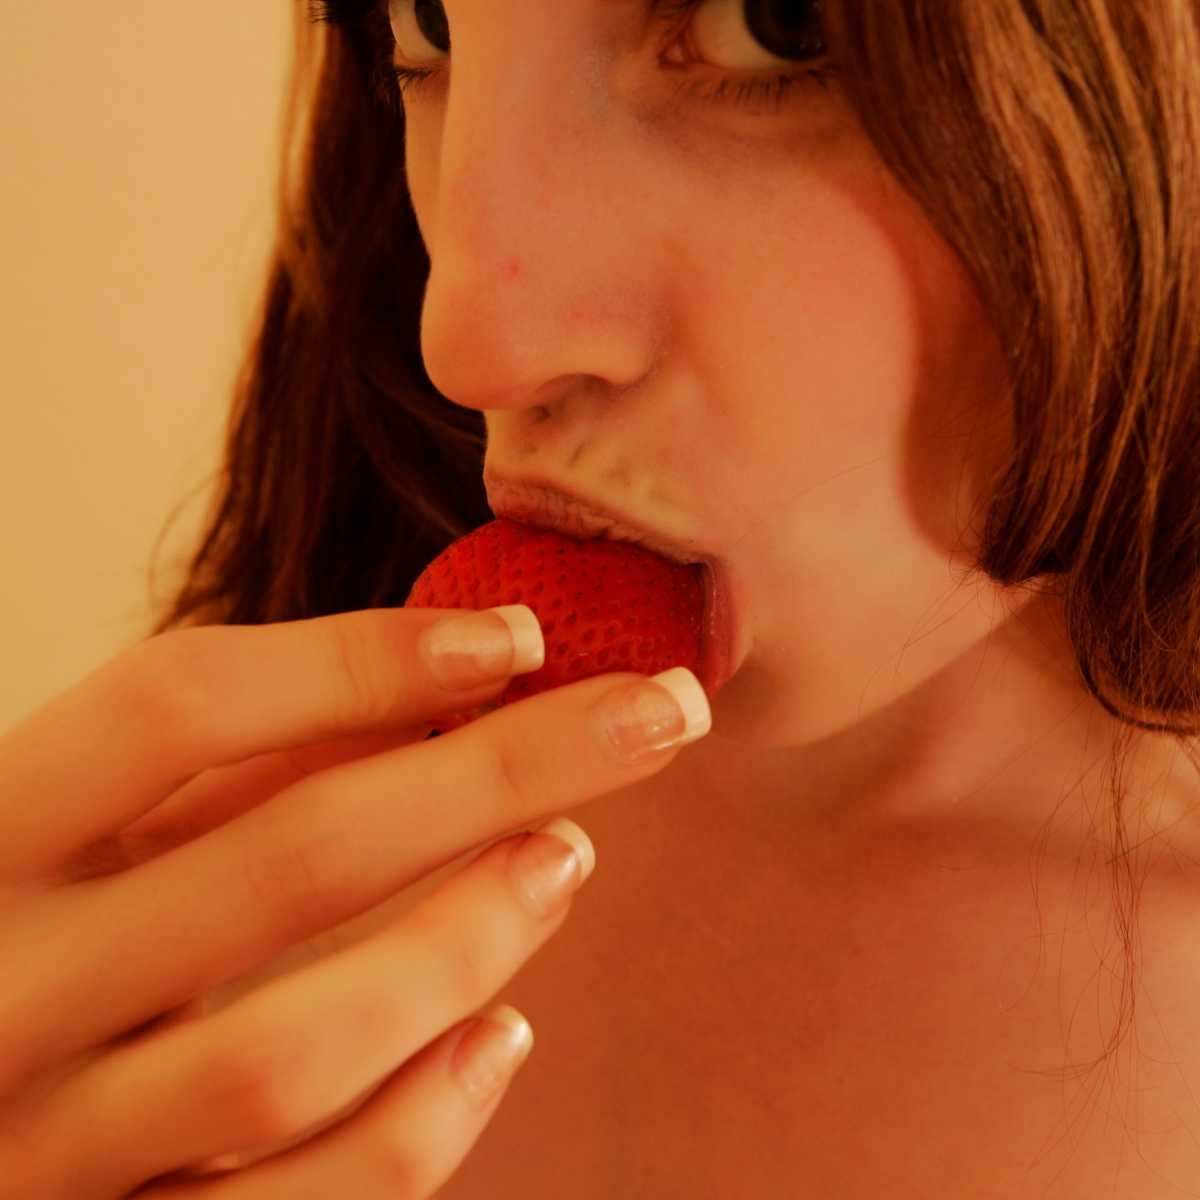 Tiny Tabitha strawberry balls of well you get the idea and this hot tiny teen wi #77140611